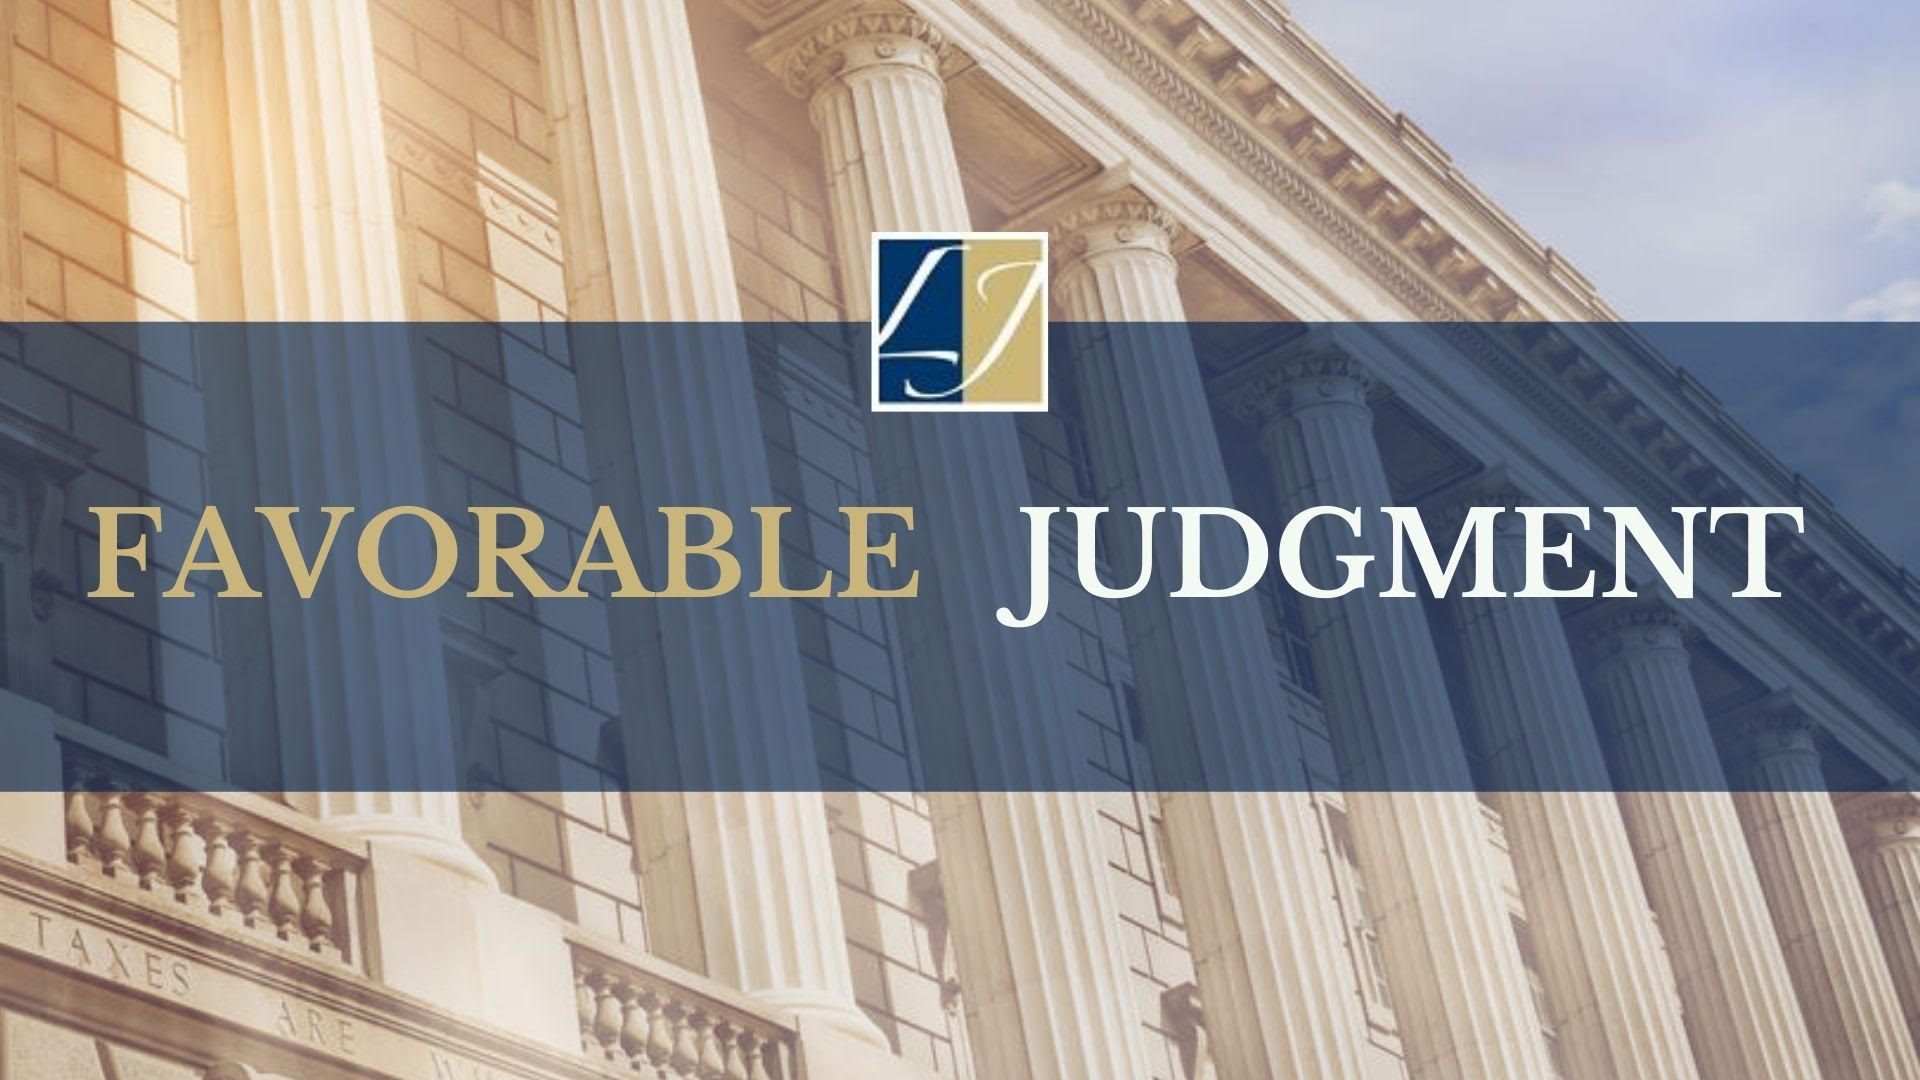 Favorable Judgment